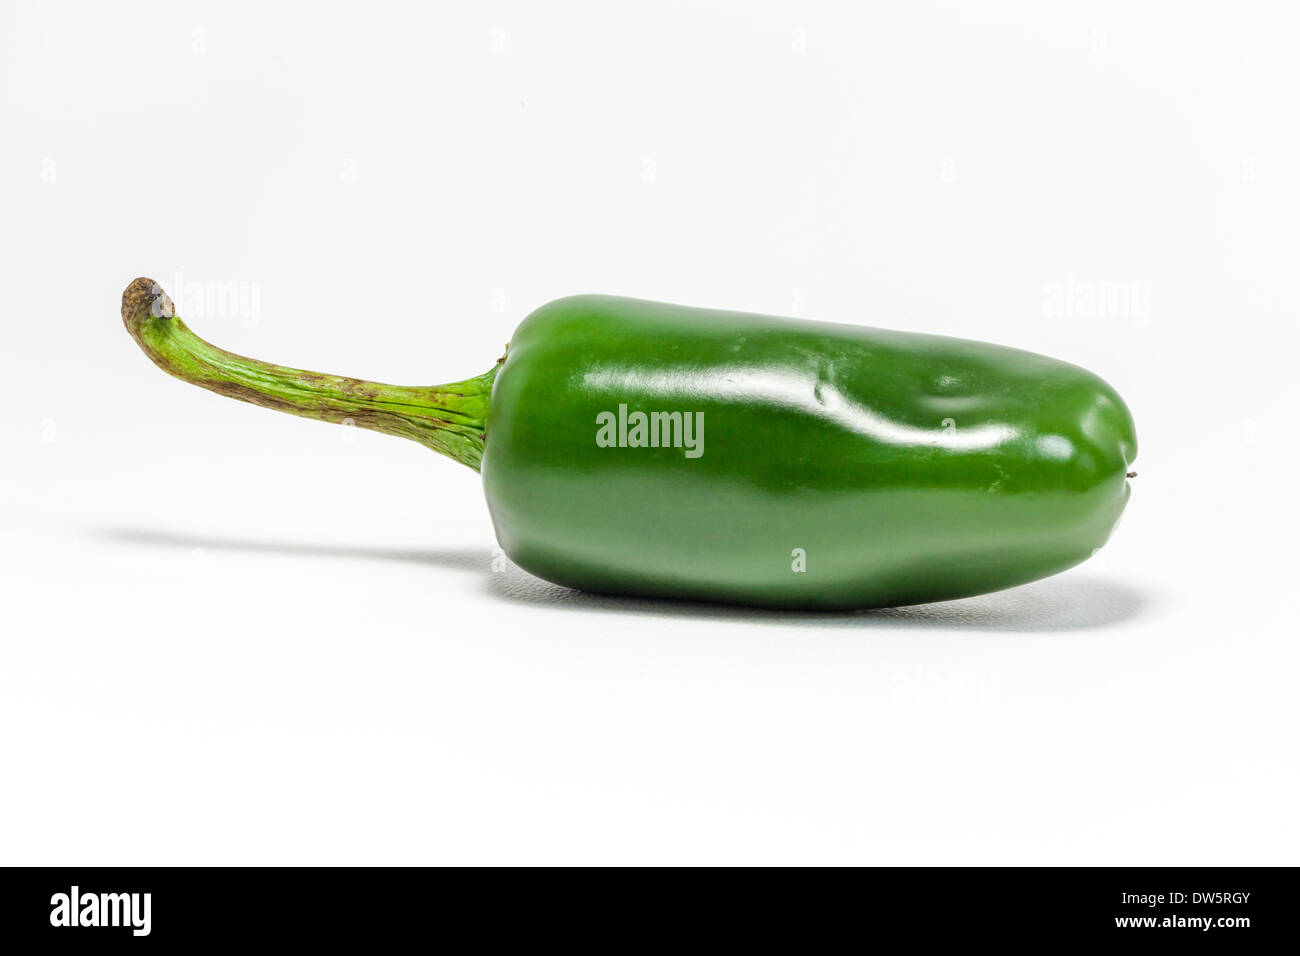 One green, very hot Jalapeno pepper, the C. Annuum cultivar of the Capsicum family. Named after Jala town in Santa Cruz, Mexico Stock Photo